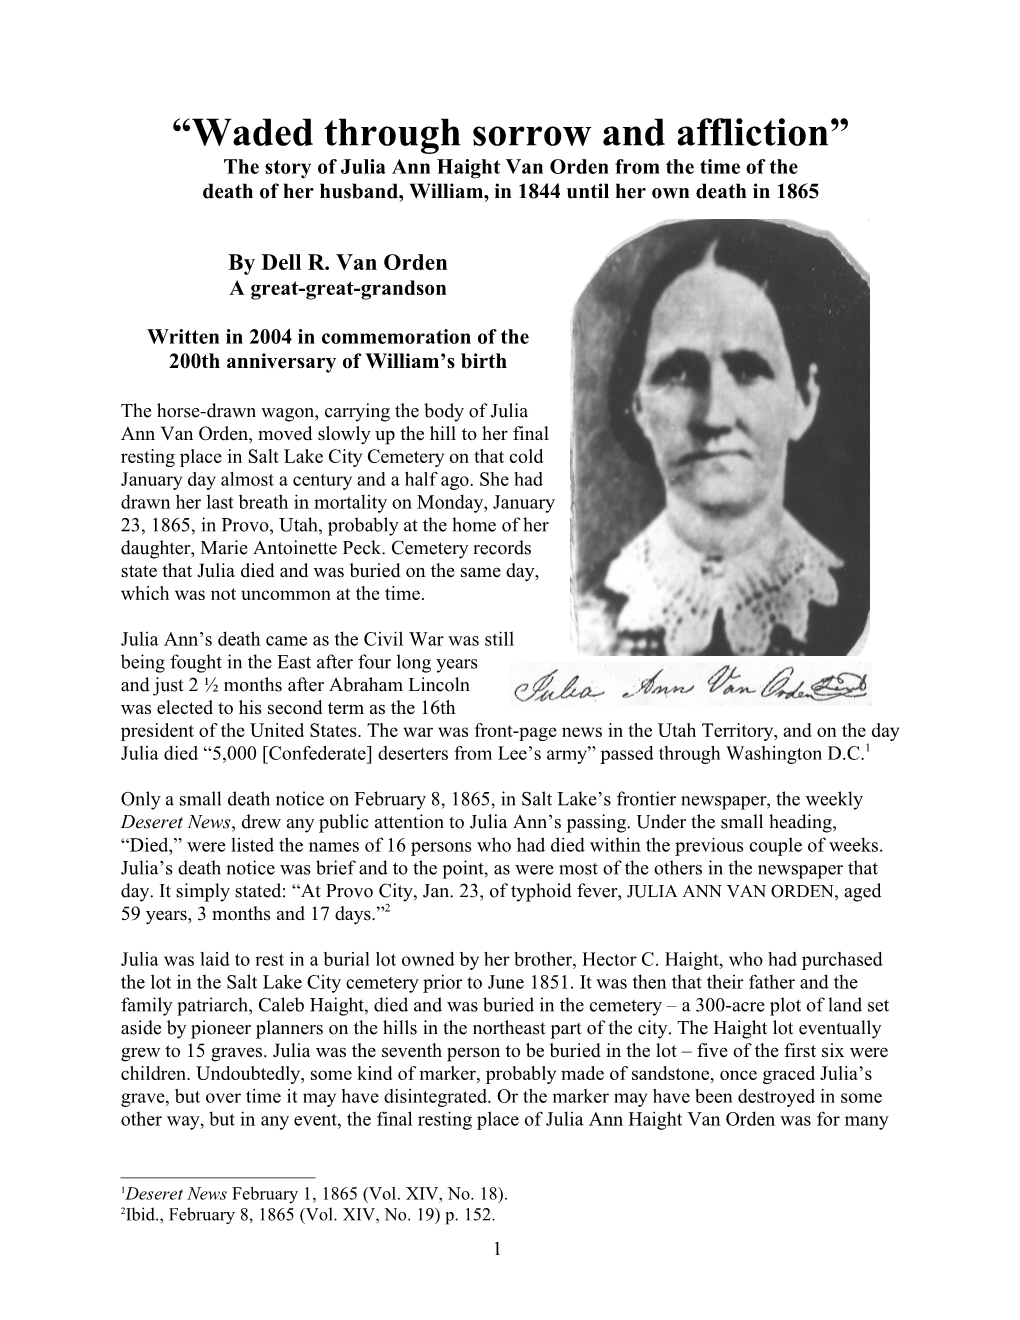 The Story of Julia Ann Haight Van Orden from the Time of the Death of Her Husband, William, in 1844 Until Her Own Death in 1865